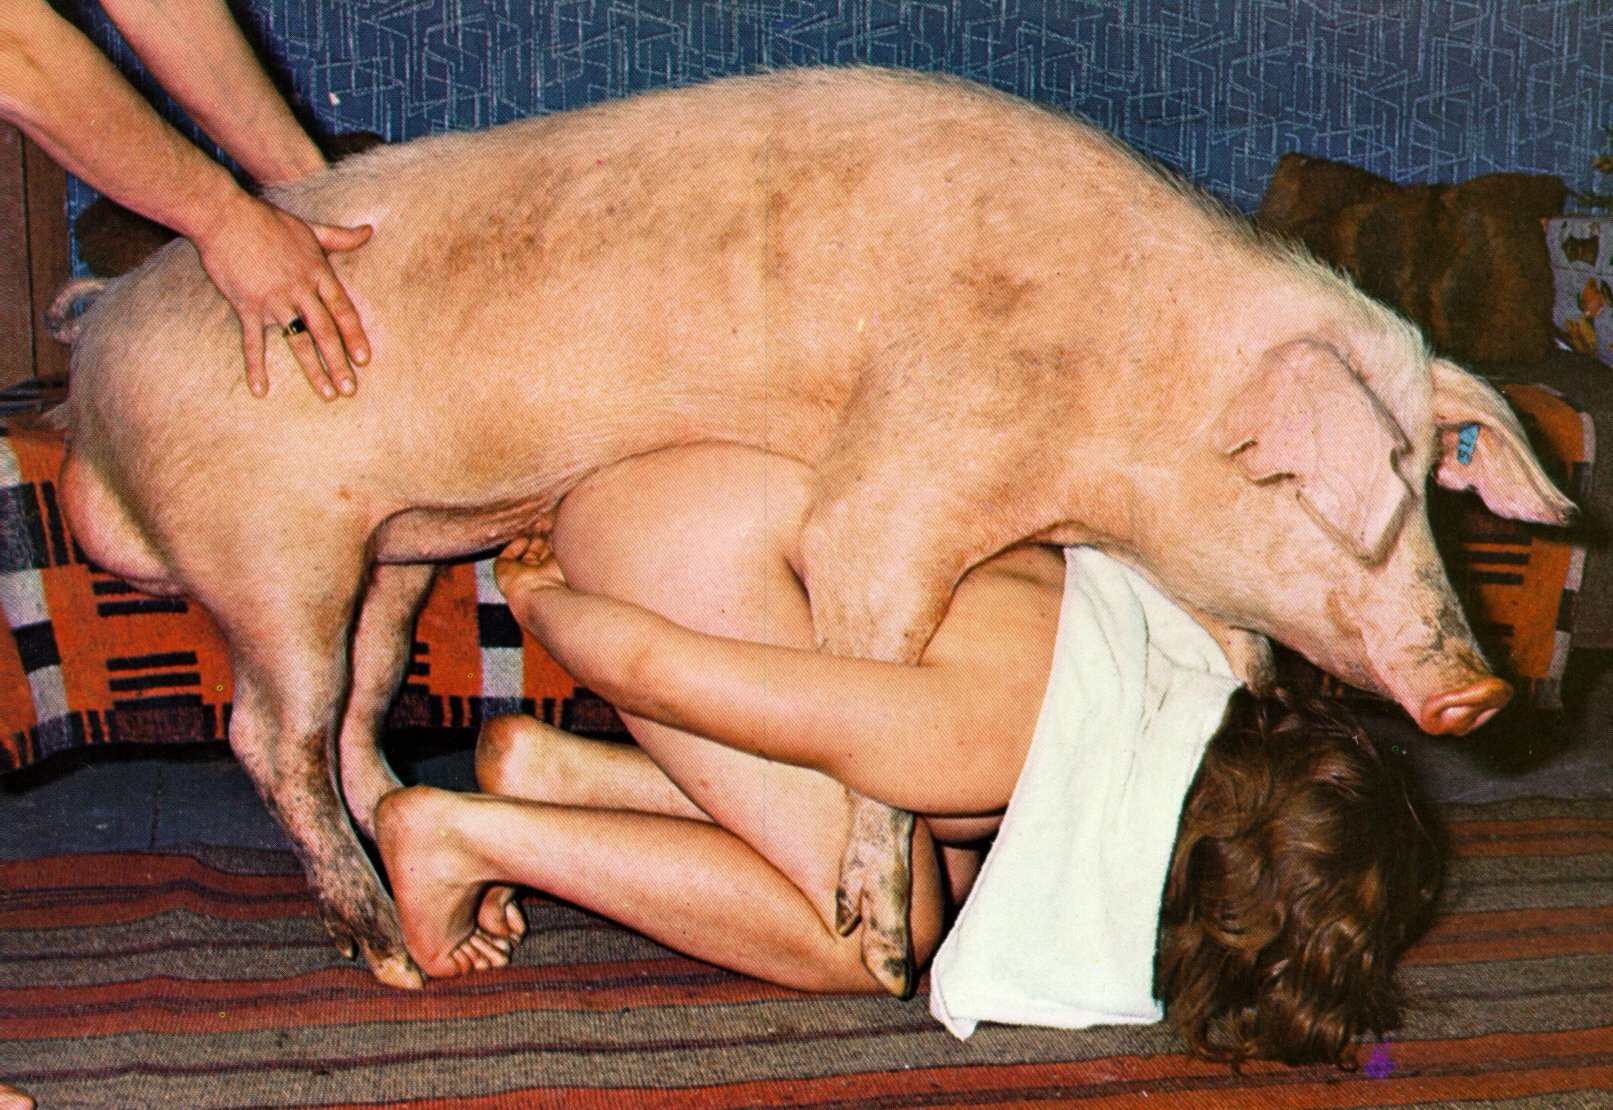 Pig and girl sex video